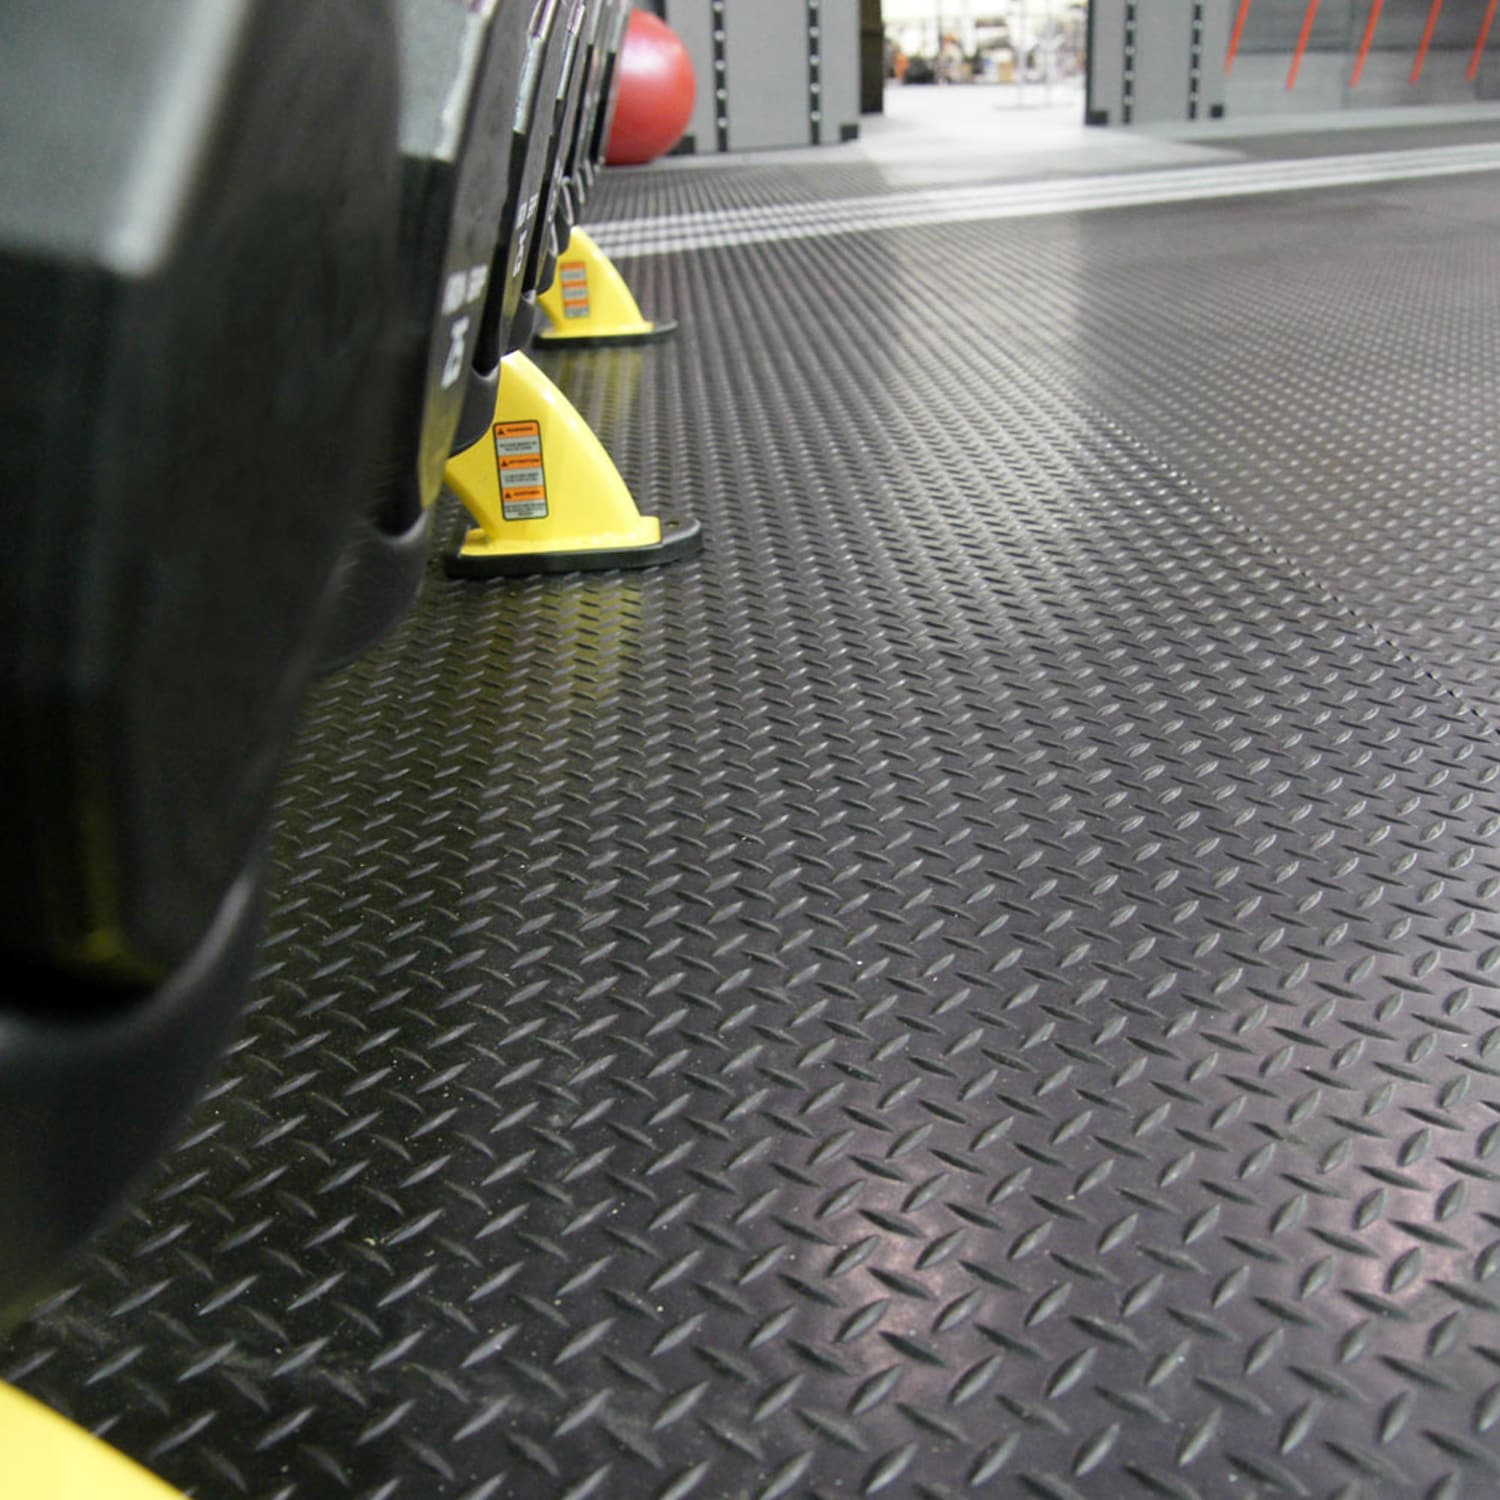 Gym Rubber Roll - Rubber Flooring Rolls Wholesaler by gym mats - Issuu